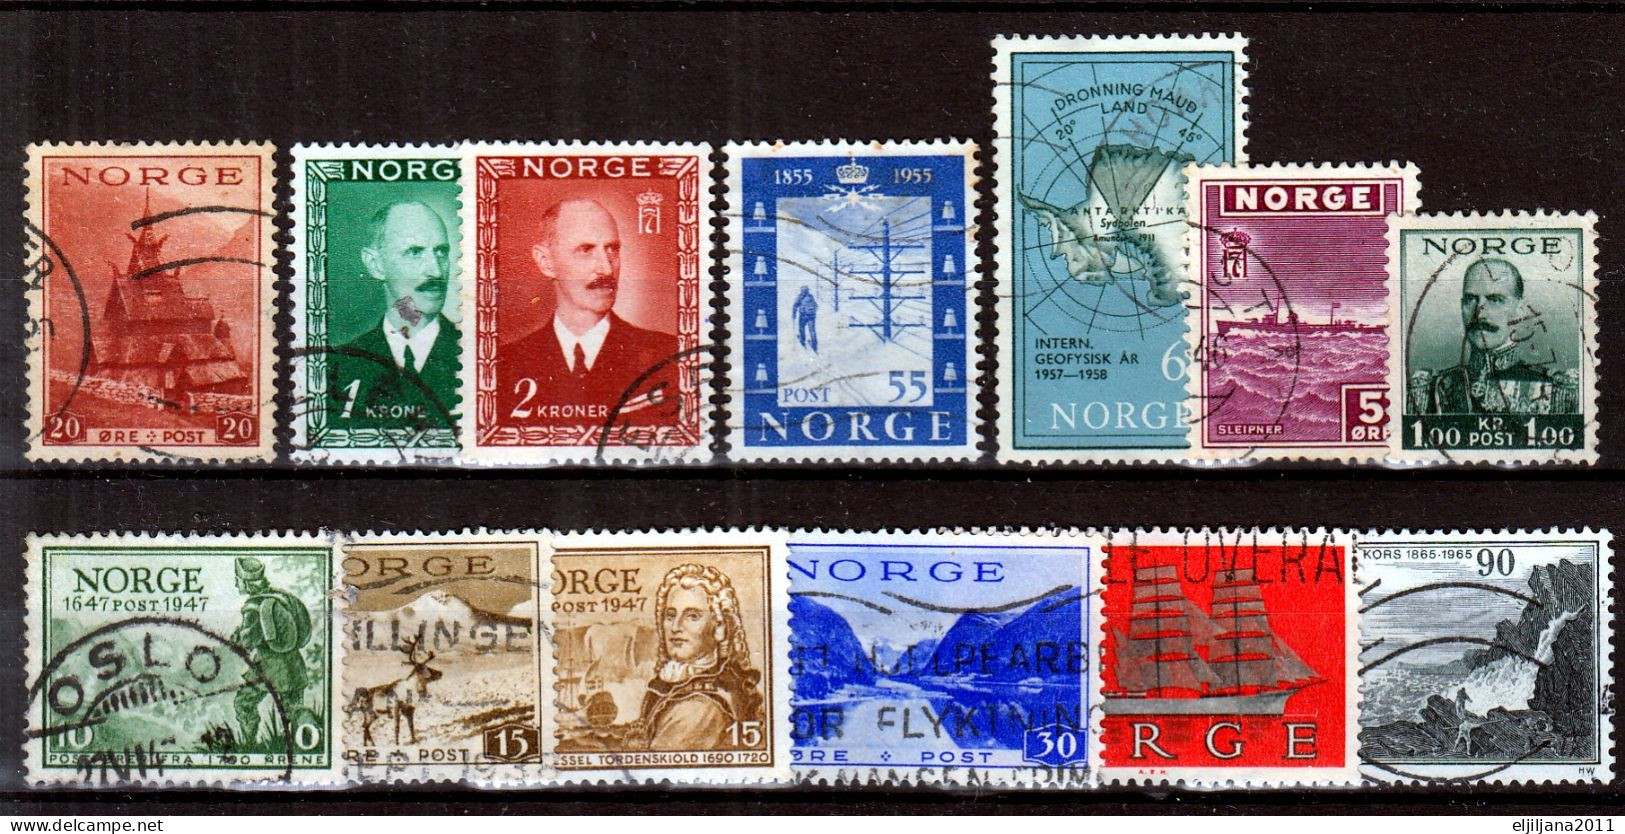 Action !! SALE !! 50 % OFF !! ⁕ Norway / NORGE 1938 - 1966 ⁕ Nice Collection / Lot ⁕ 32v Used - See Scan - Sammlungen